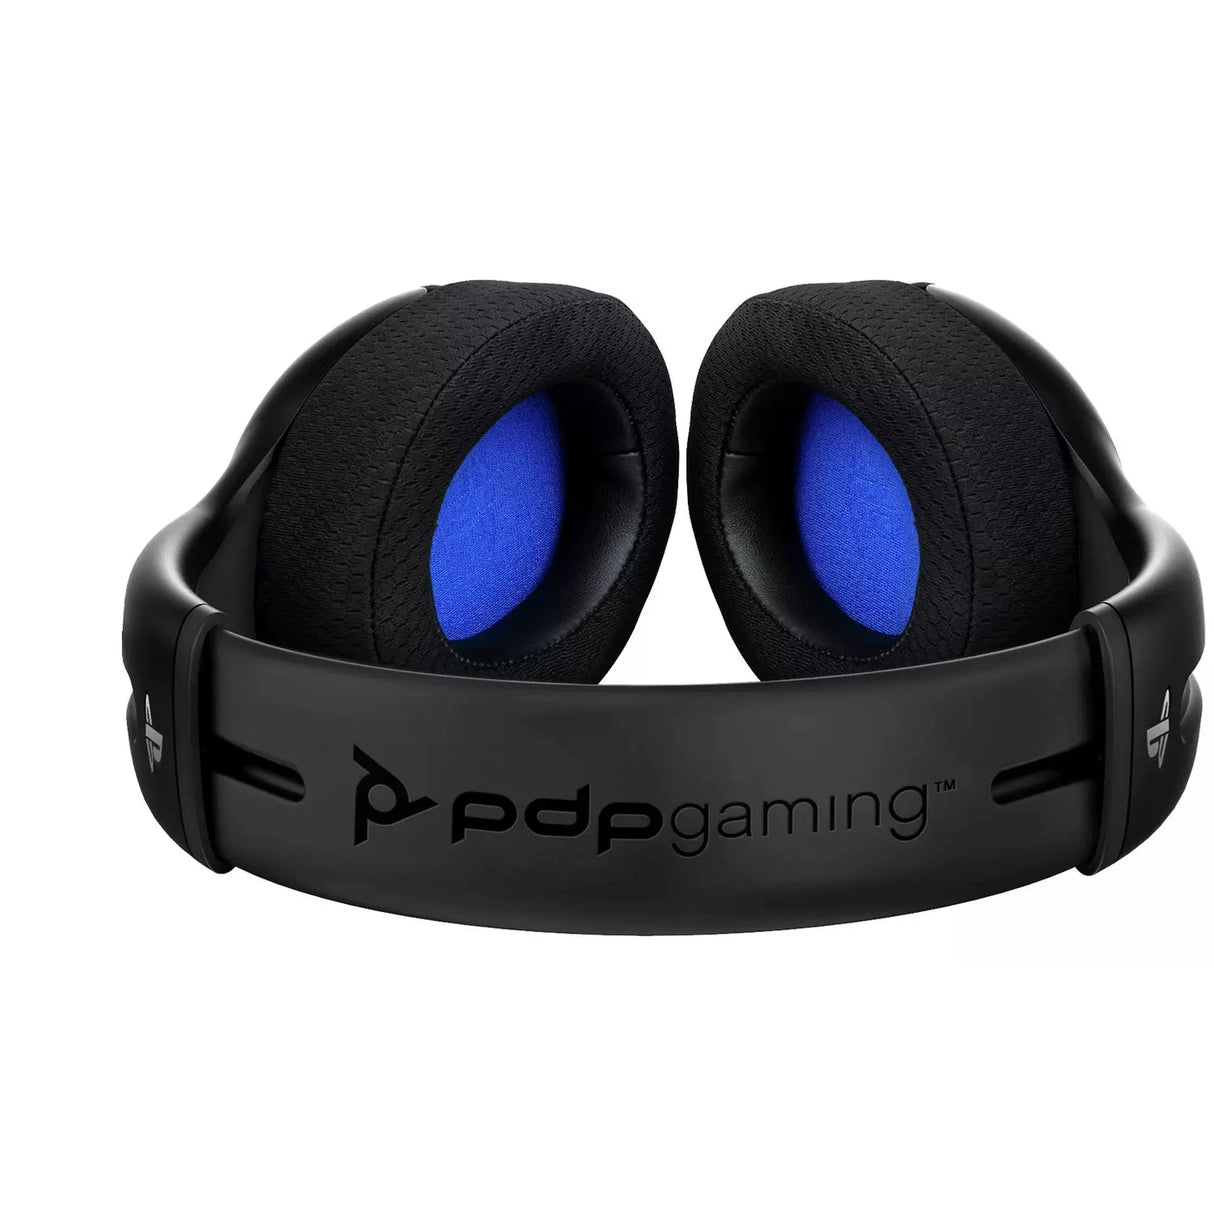 PDP LVL50 Wired Stereo Headset PS4 & PS5 - Black - Refurbished Excellent